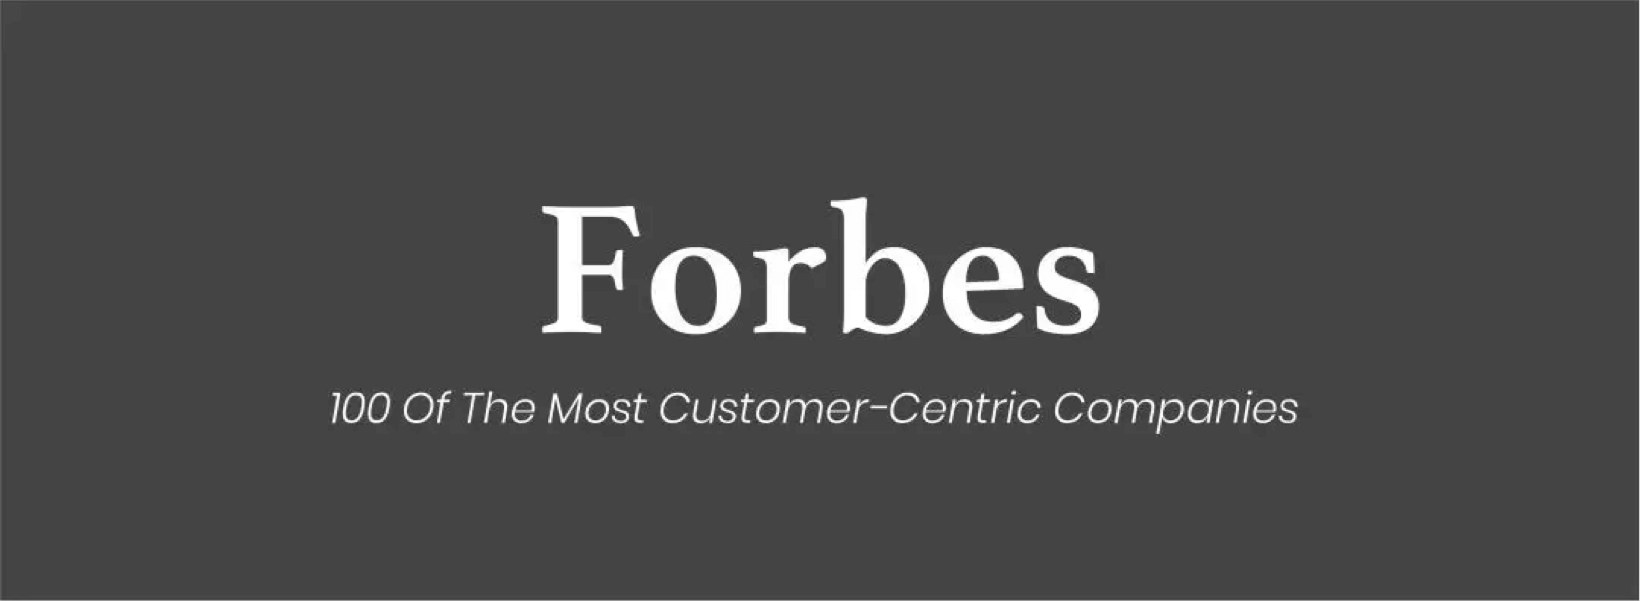 Forbes: 100 of The Most Customer-Centric Companies